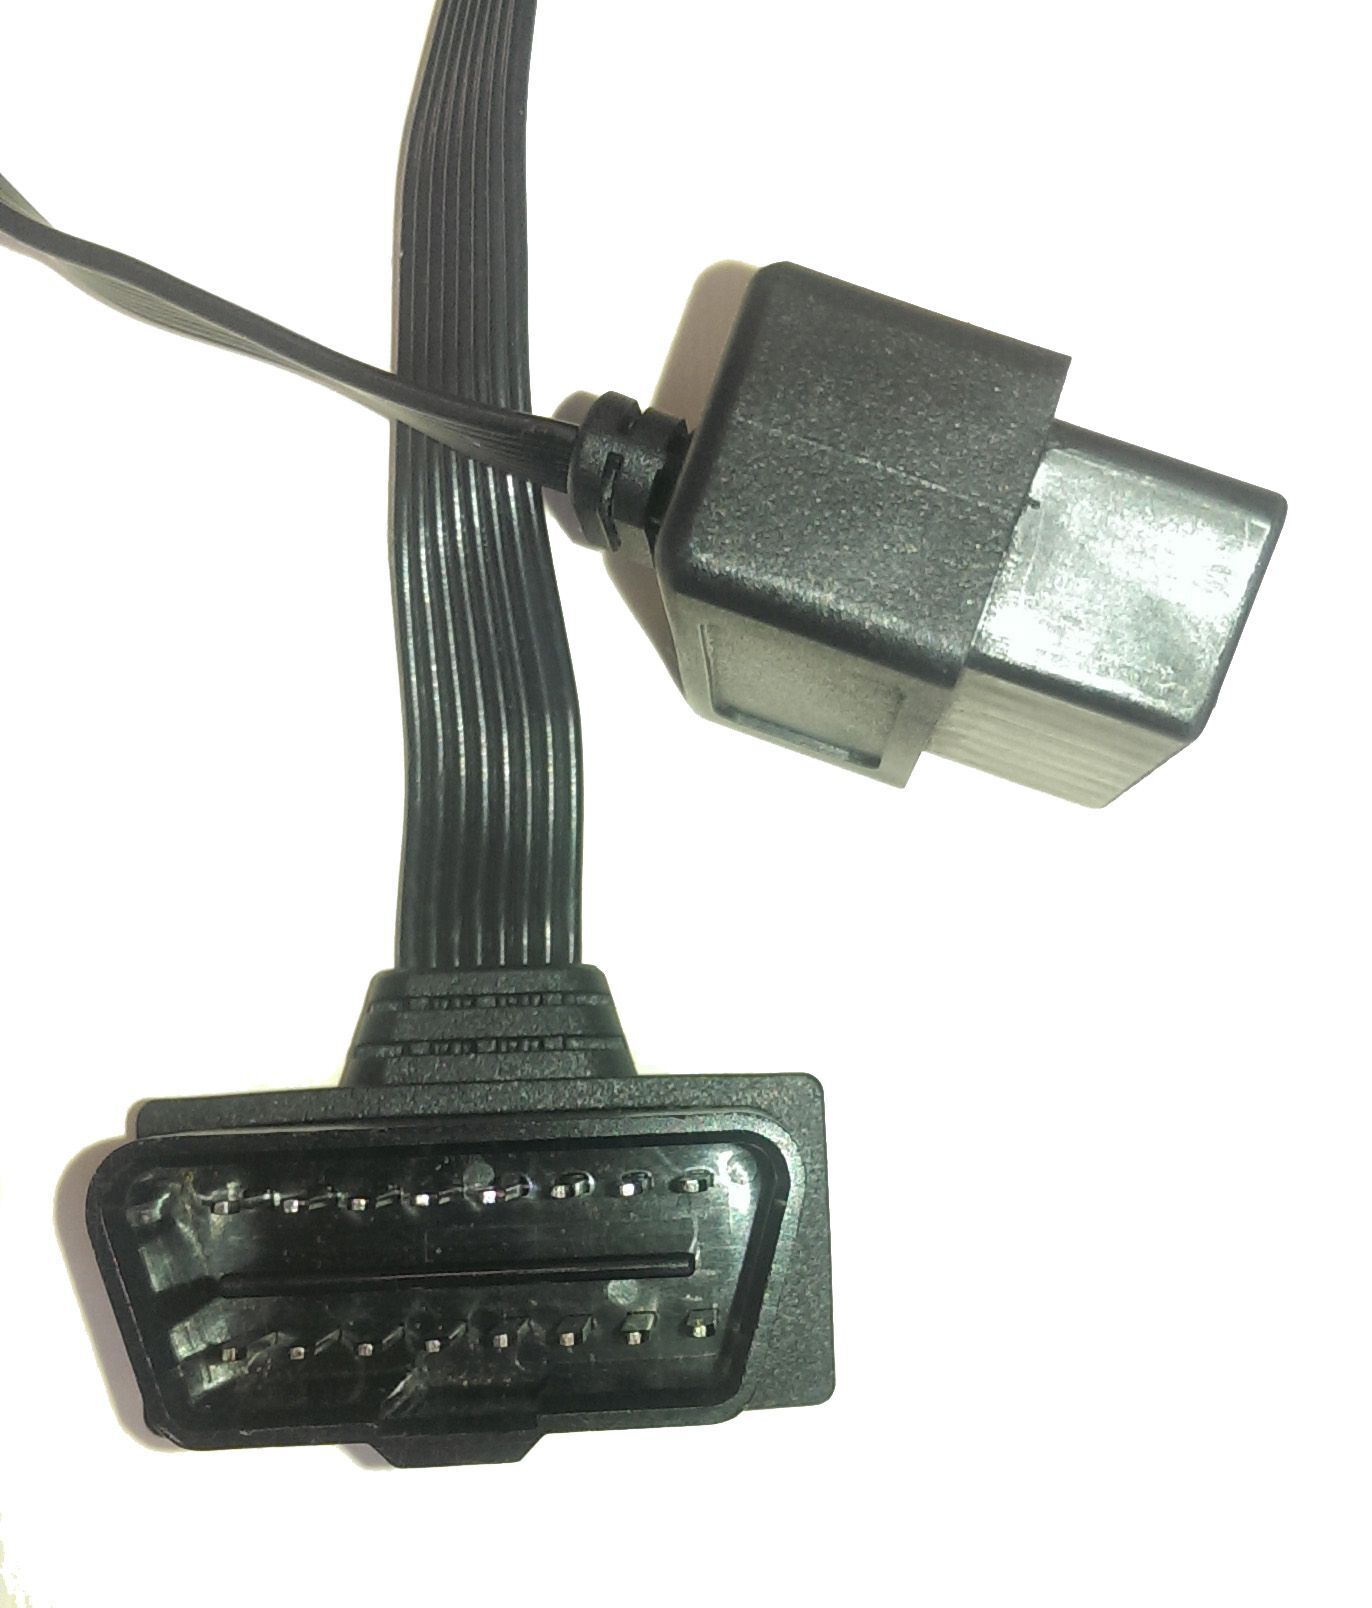 OBD2 Extend Cable 16pin